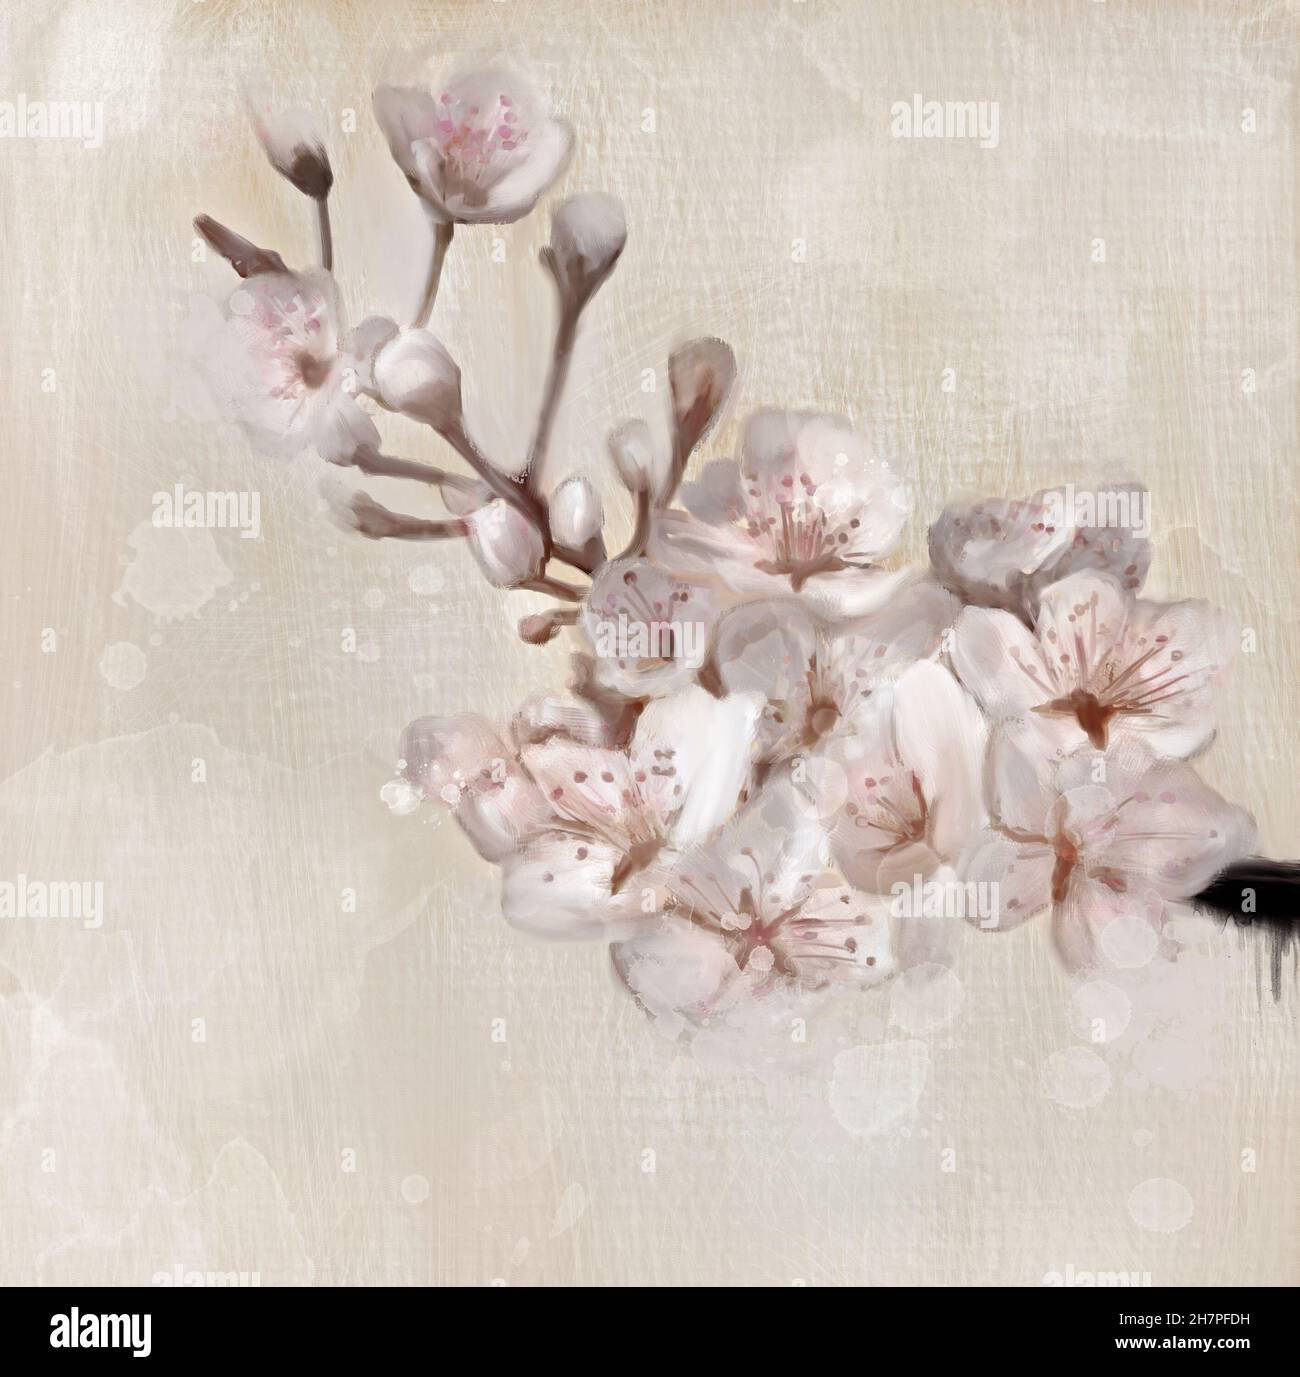 Spring and summer flowers collection – cherry blossom branch in oil painting style Stock Photo